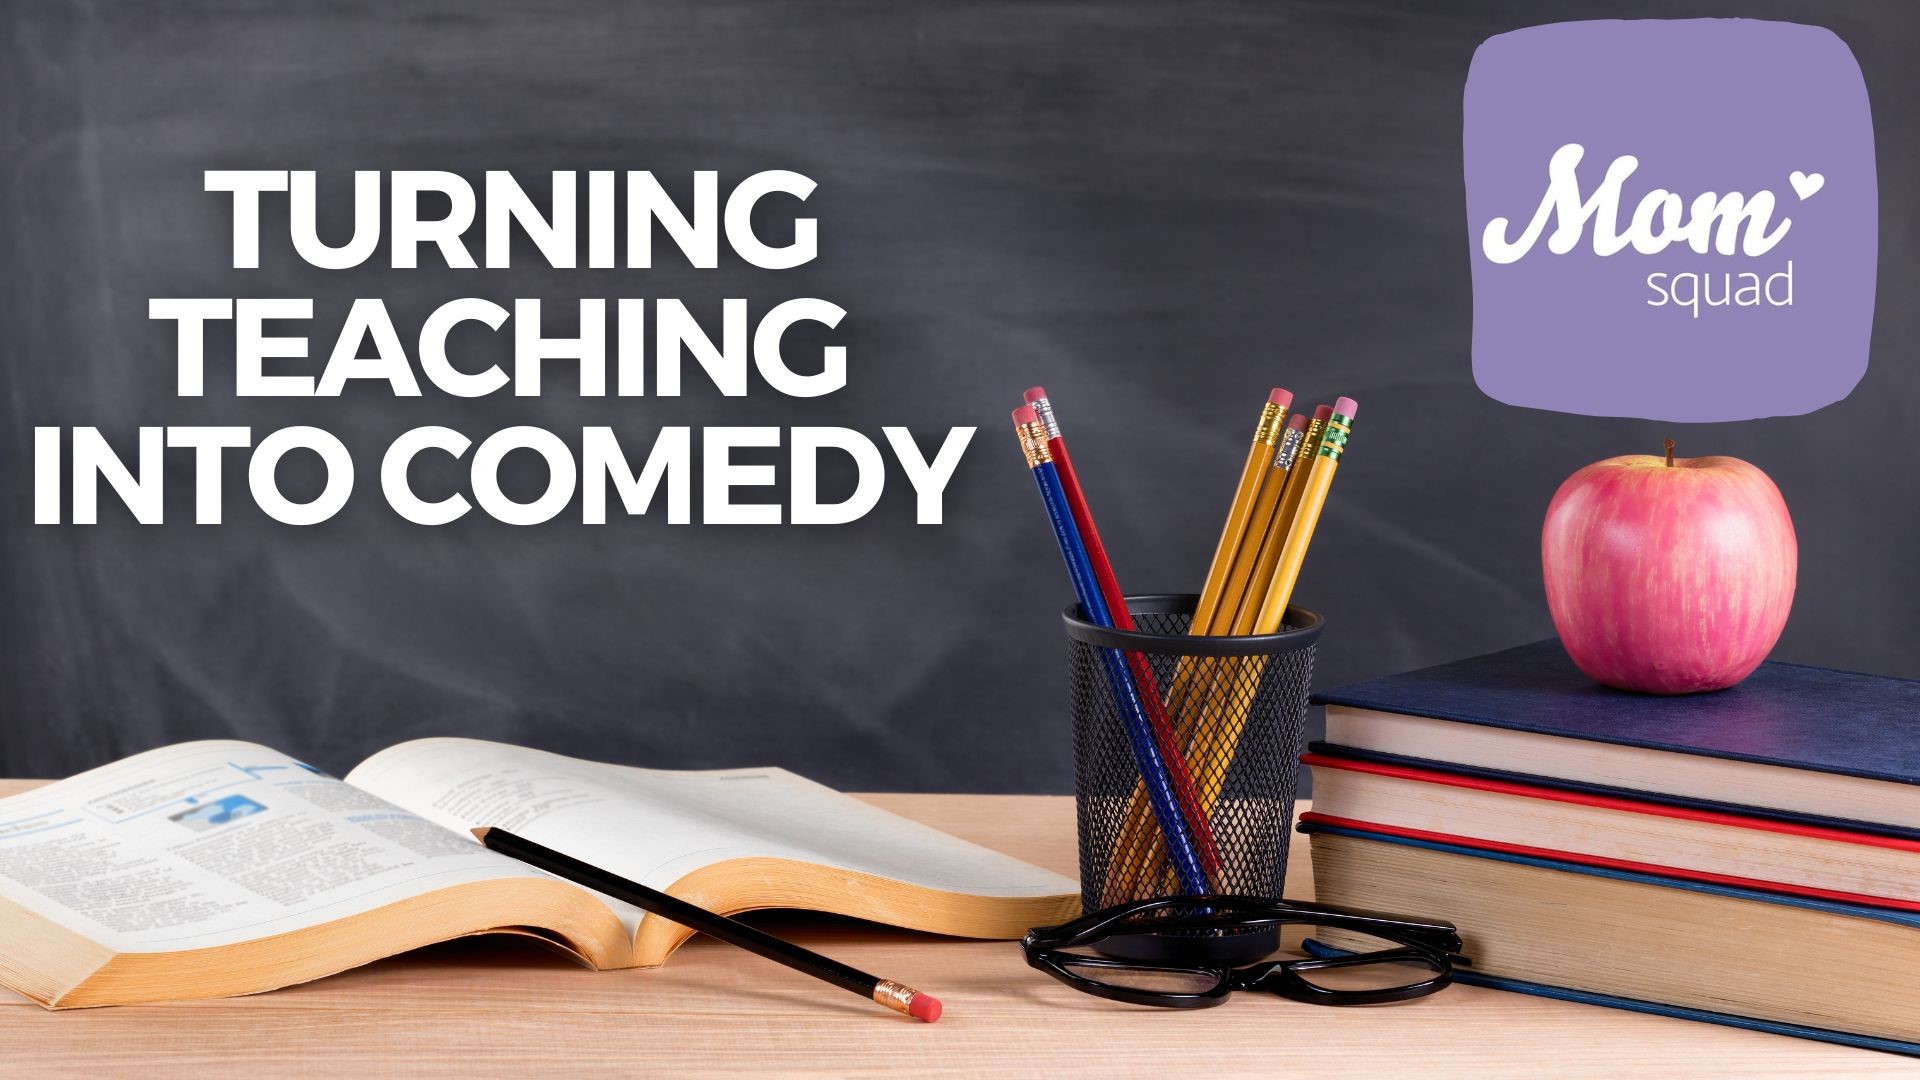 WKYC's Maureen Kyle sits down with stand- up comedian Liz Blanc to discuss how she finds humor in the classroom and turns teaching into comedy.